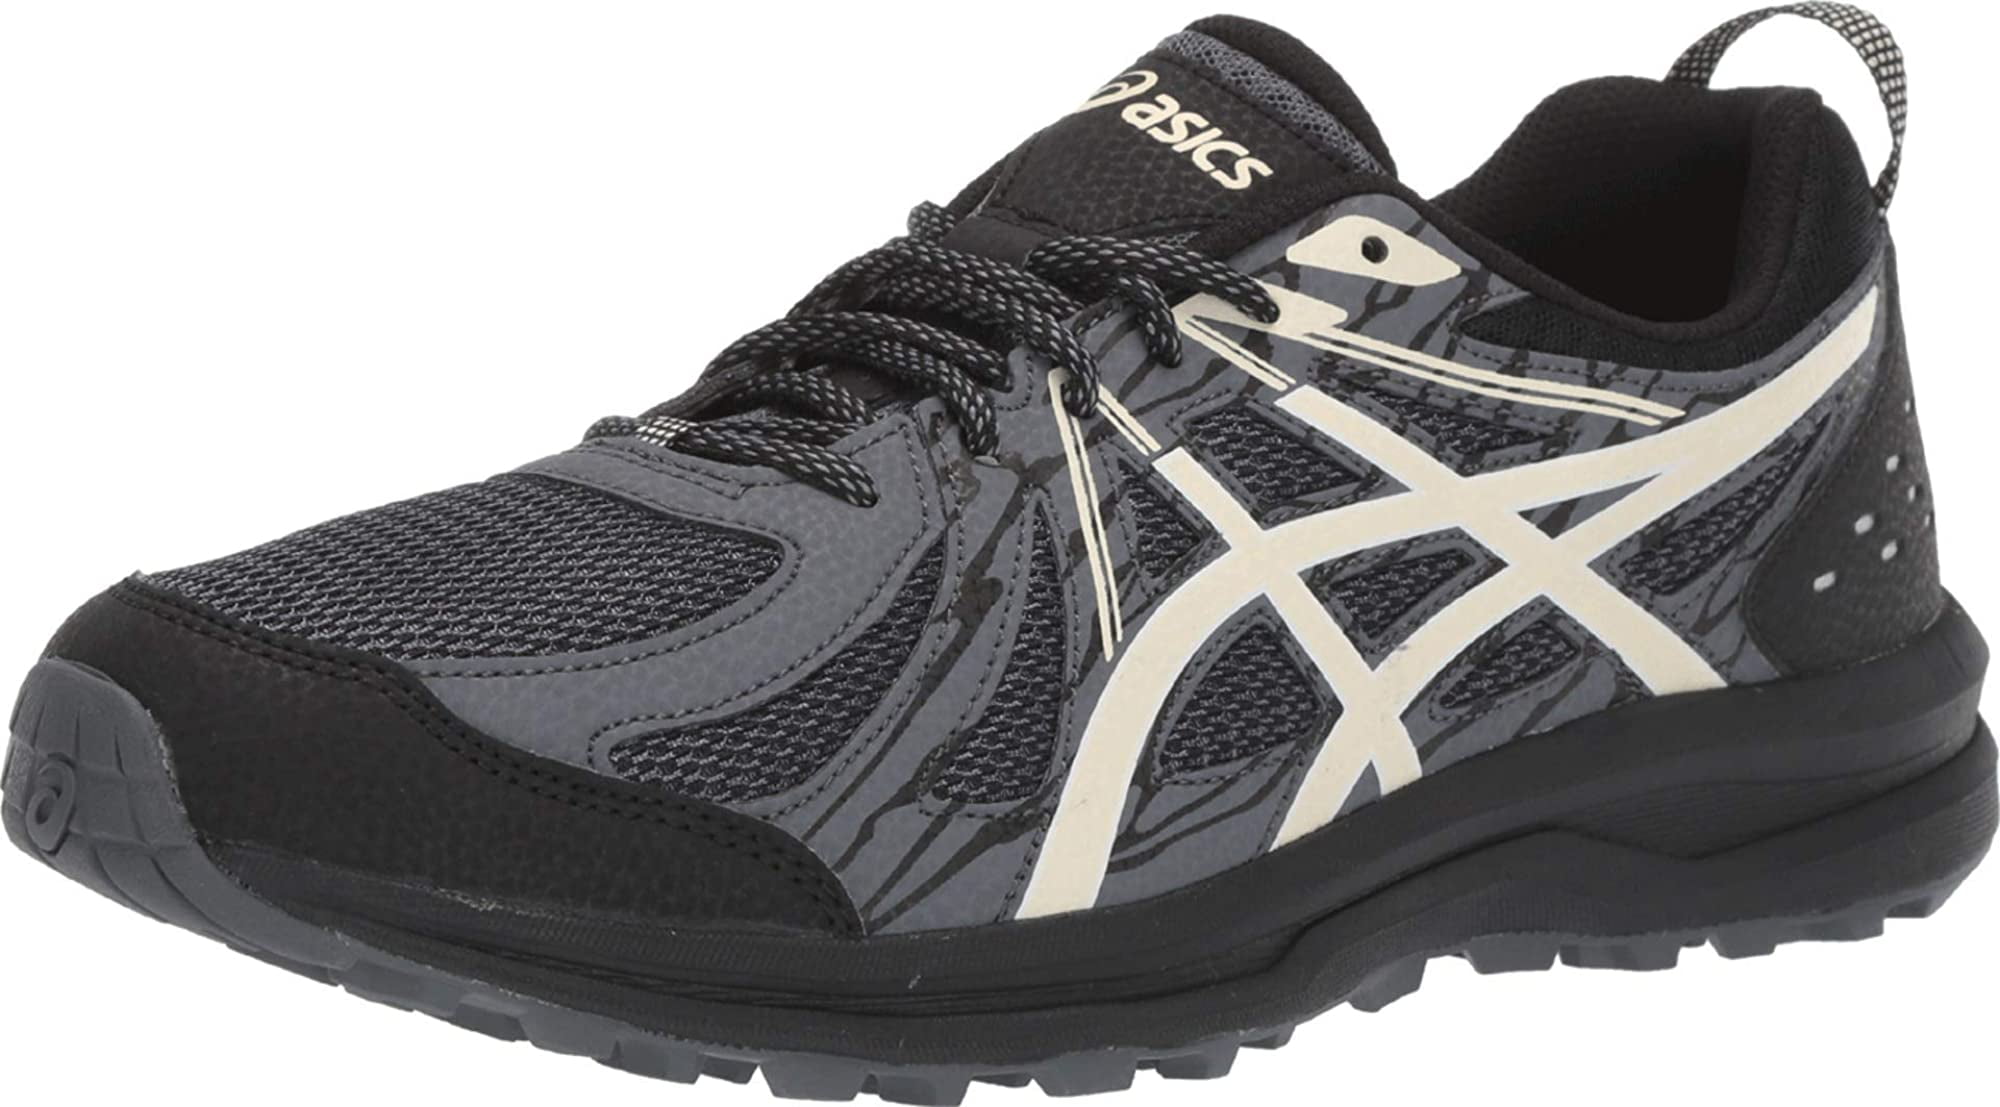 asics men's frequent trail shoe